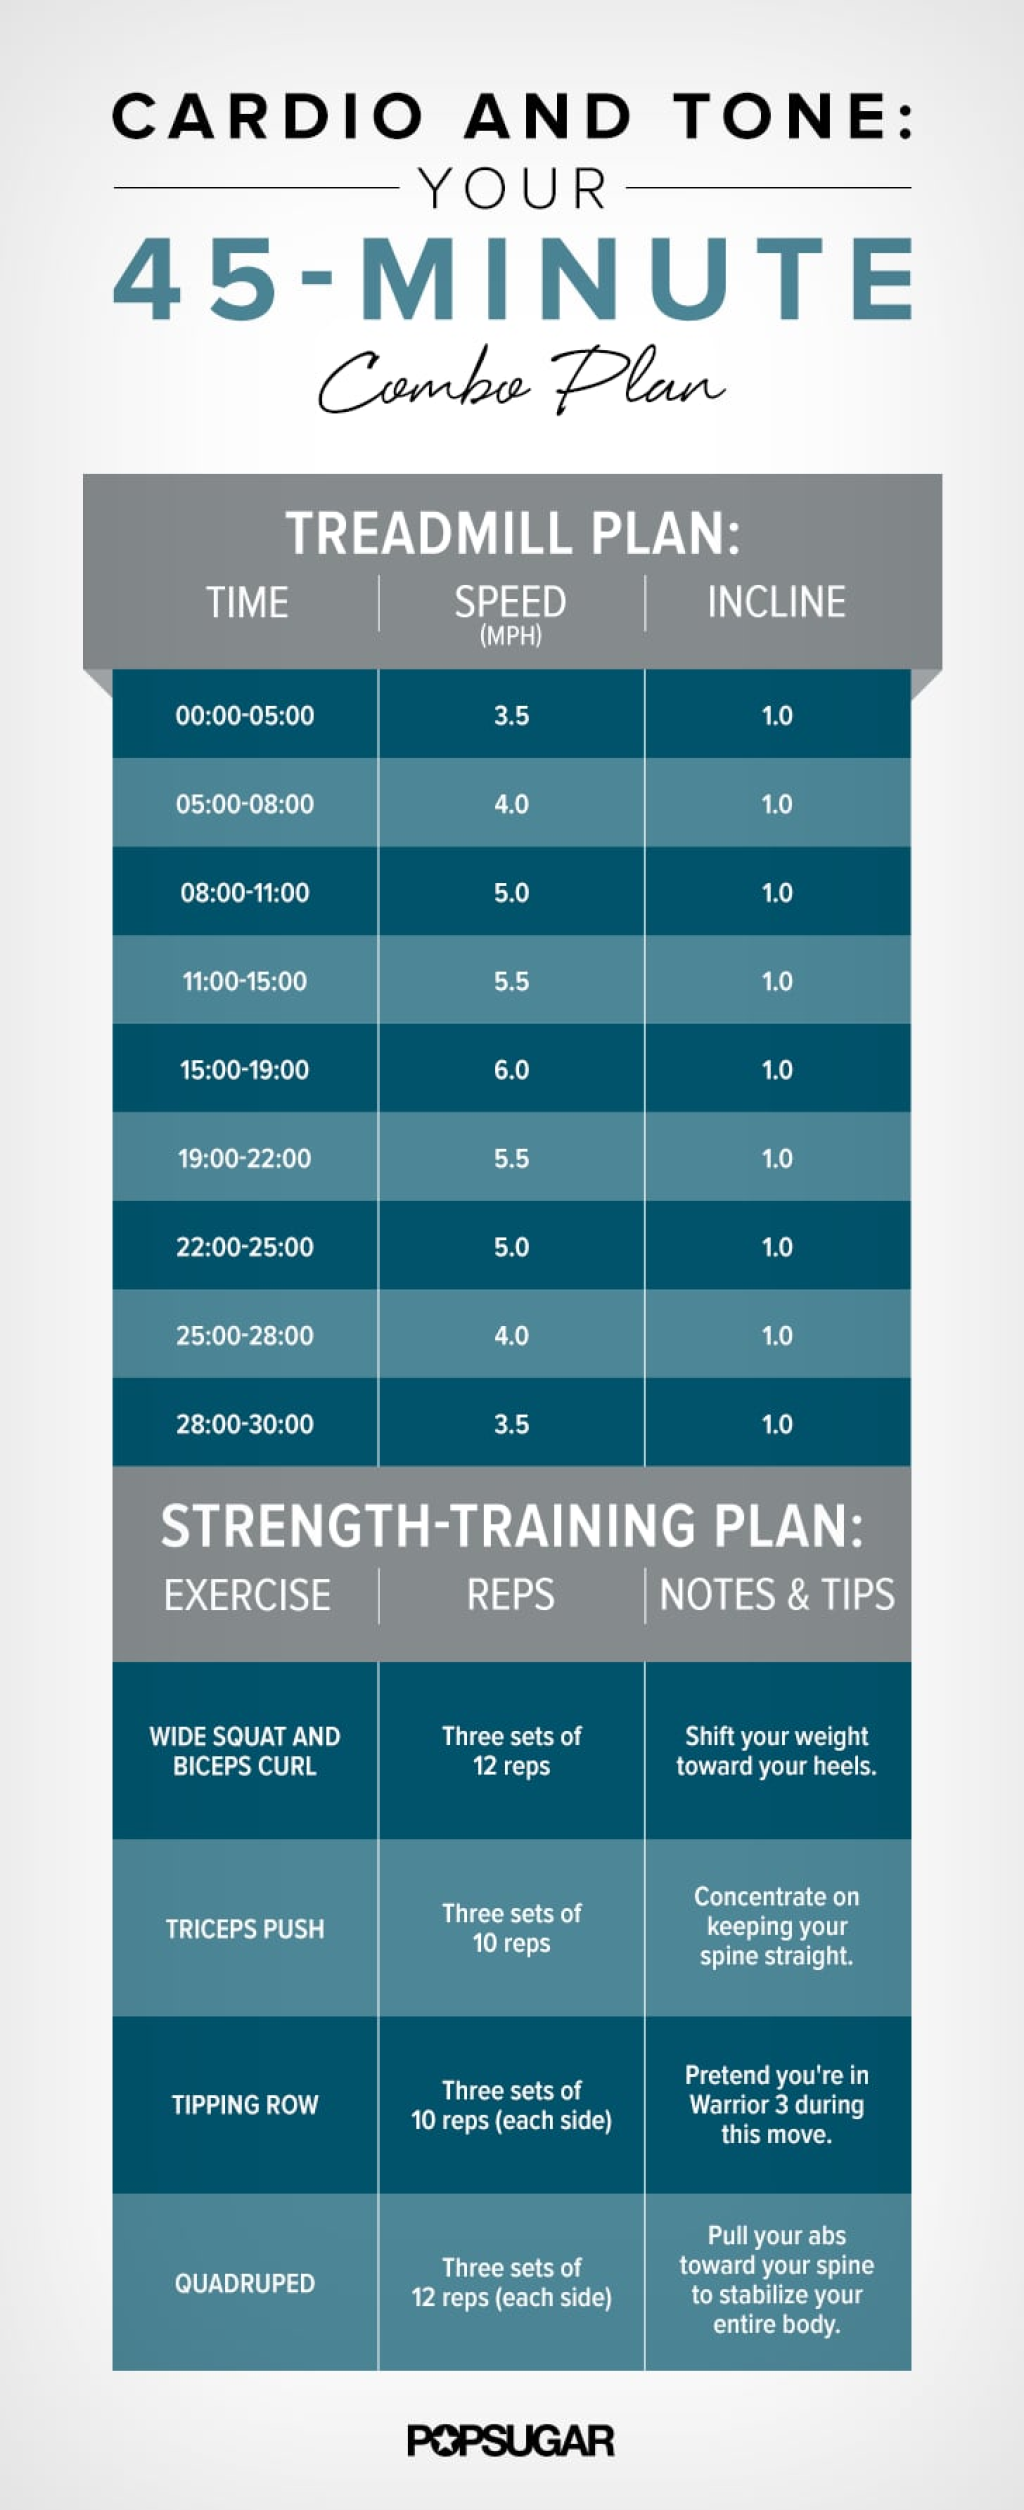 Picture of: -Minute Gym Plan With Treadmill  POPSUGAR Fitness